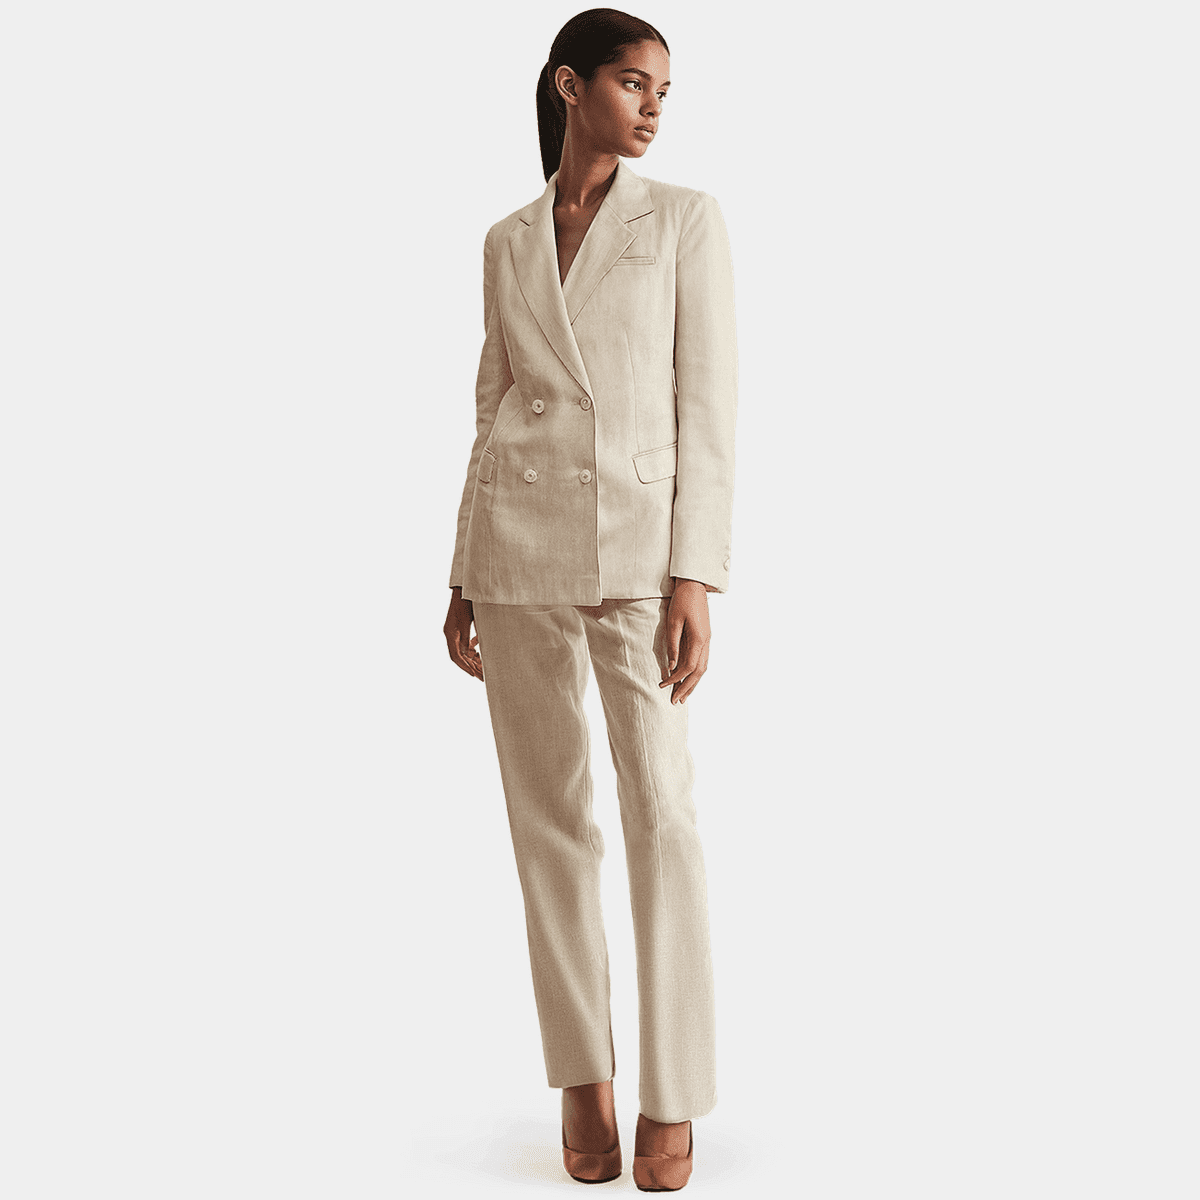 Beige double breasted linen Pant Suit - relaxed fit